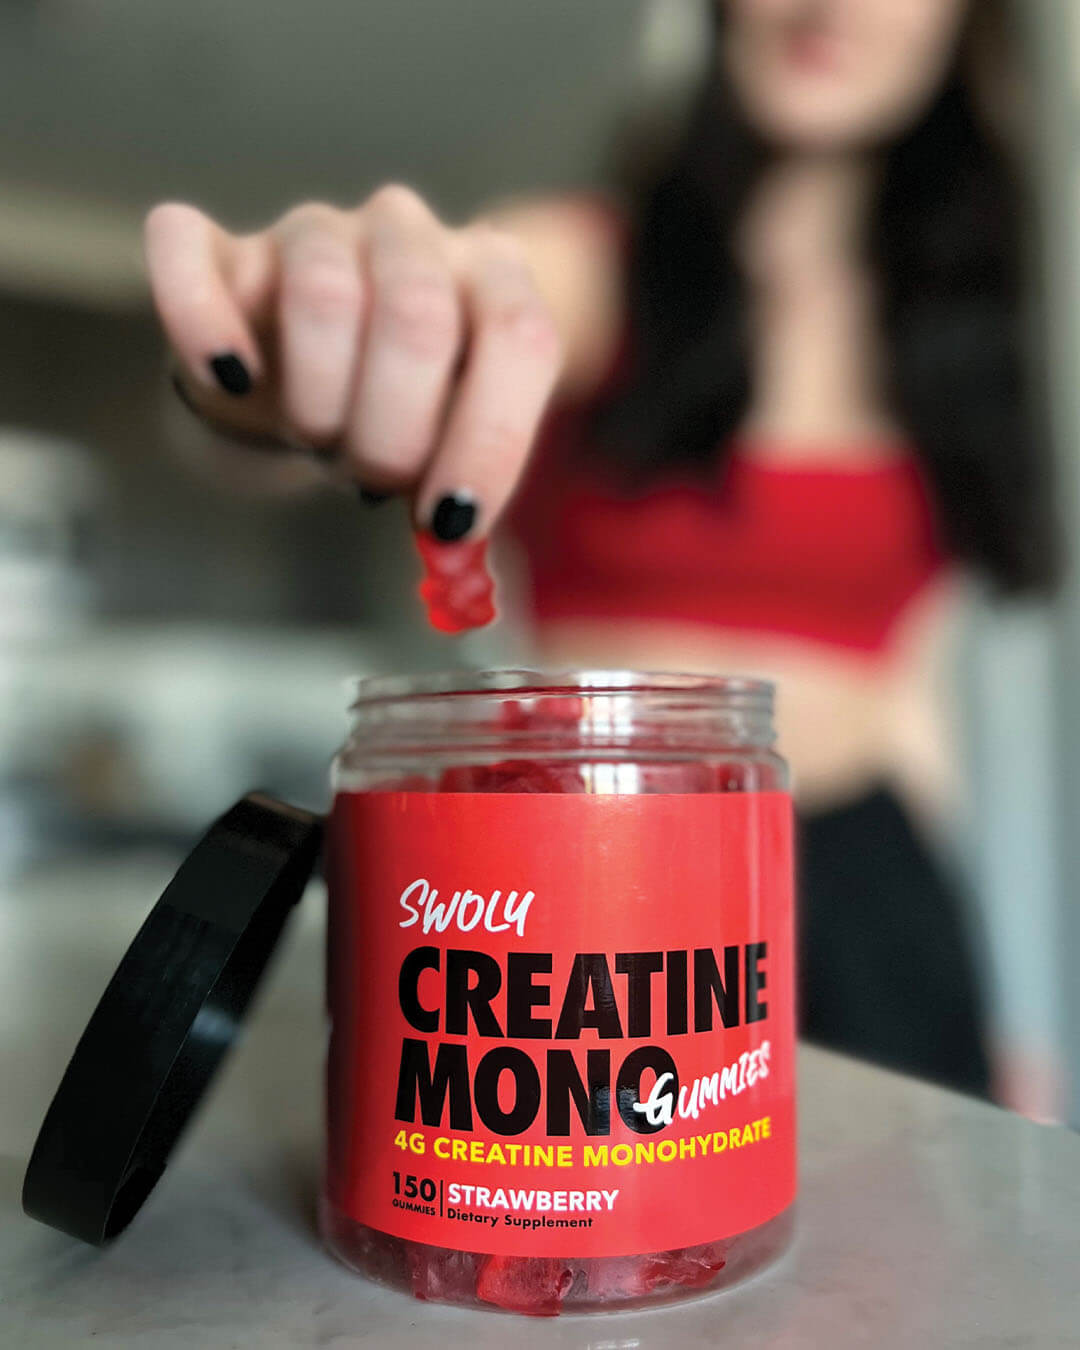 hand grabbing swoly creatine gummies from container in a gym, strawberry flavored gummy supplement